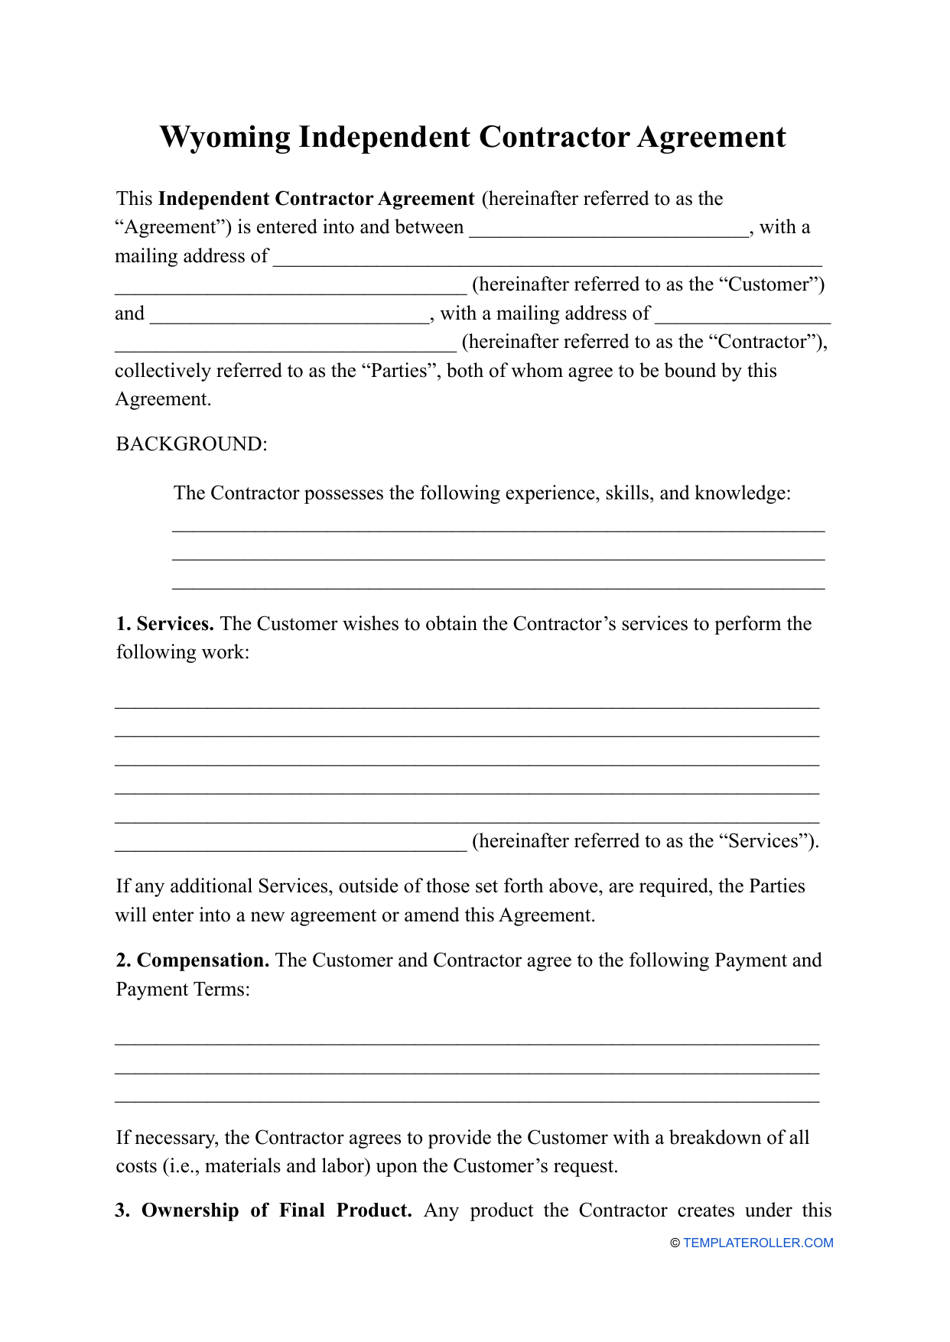 Independent Contractor Agreement Template - Wyoming, Page 1